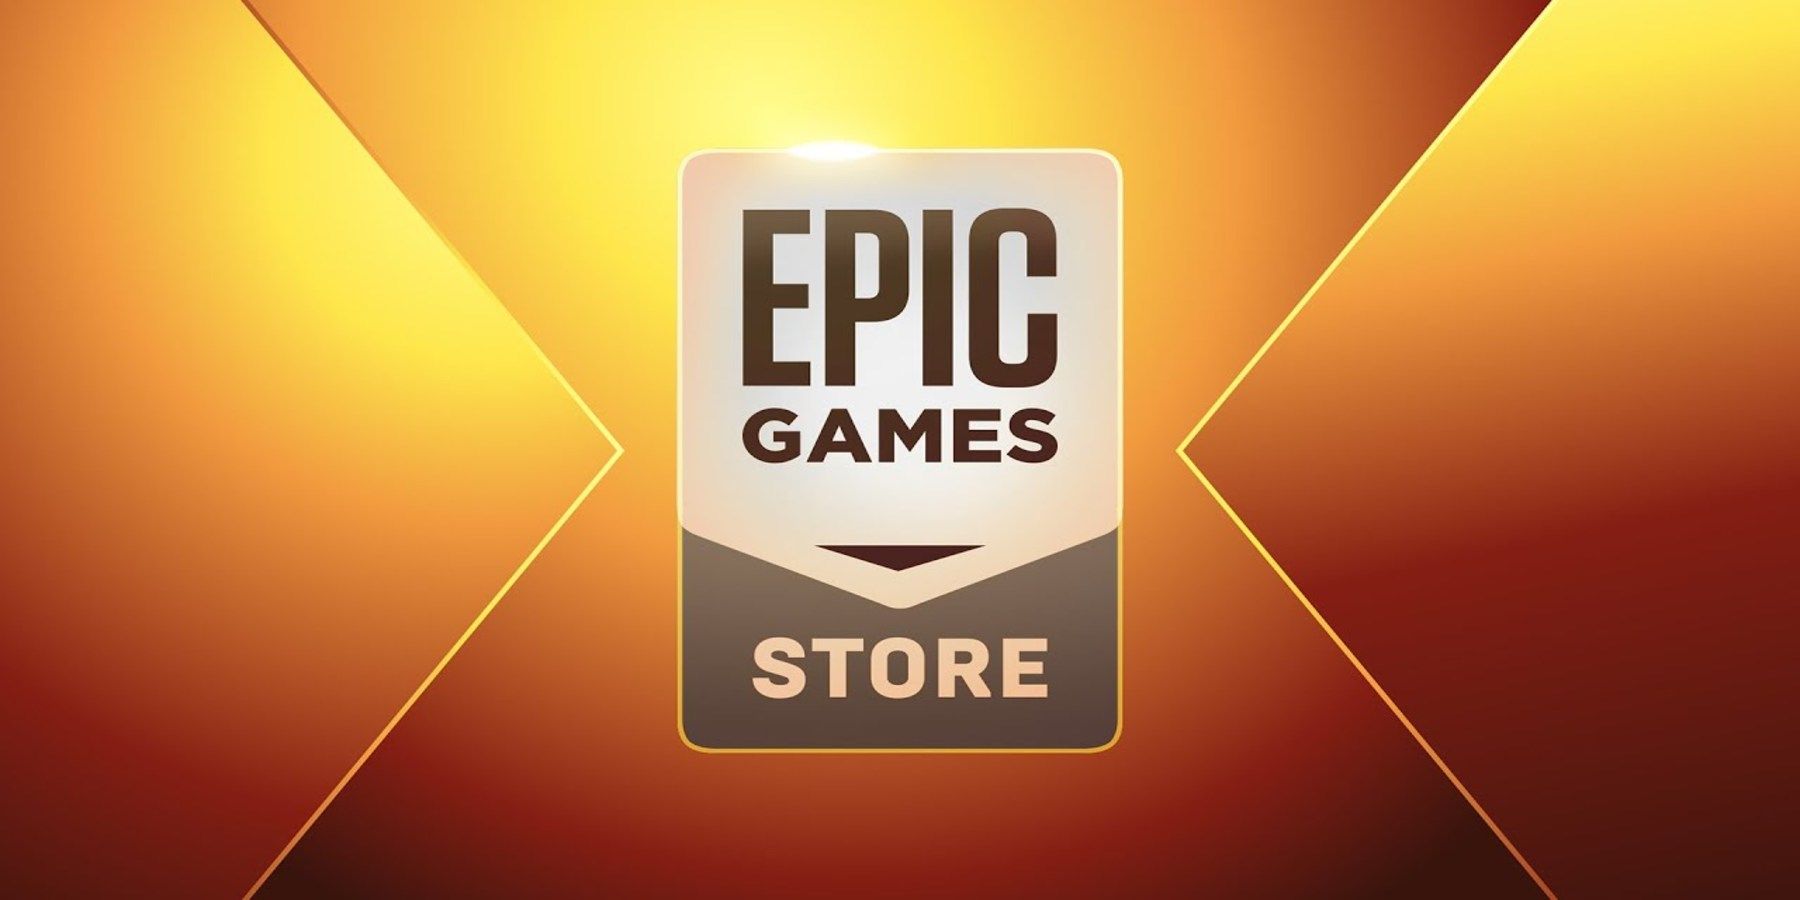 Epic Games Offering 10 Coupons in Exchange for Email Address